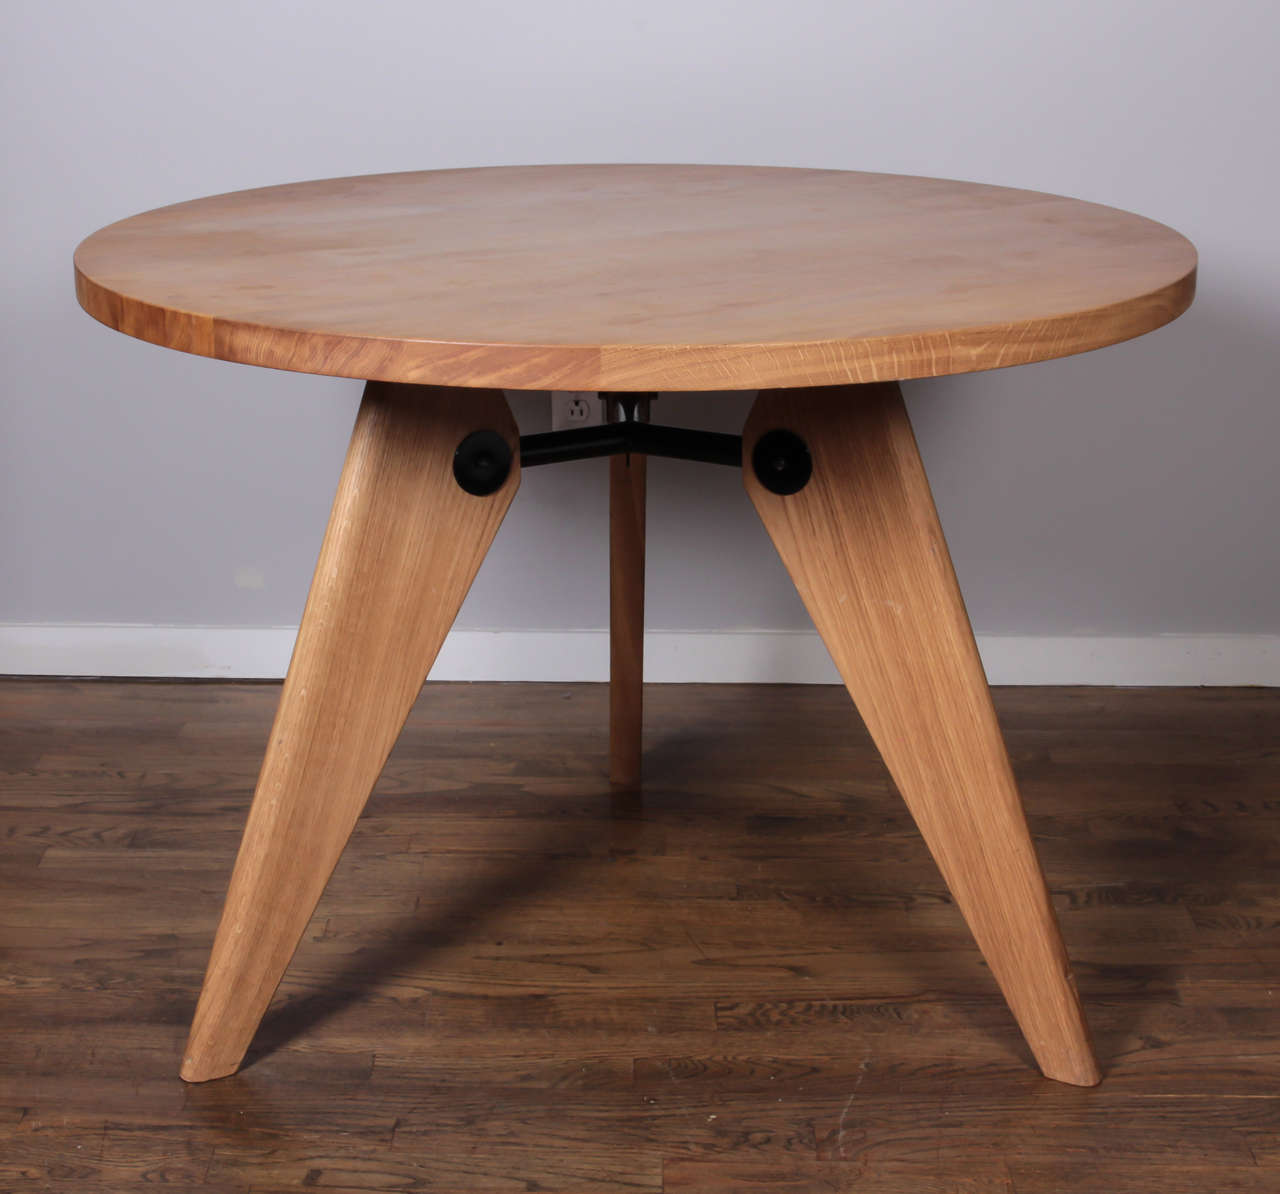 German Jean Prouve Gueridon Dining Table Produced by Vitra